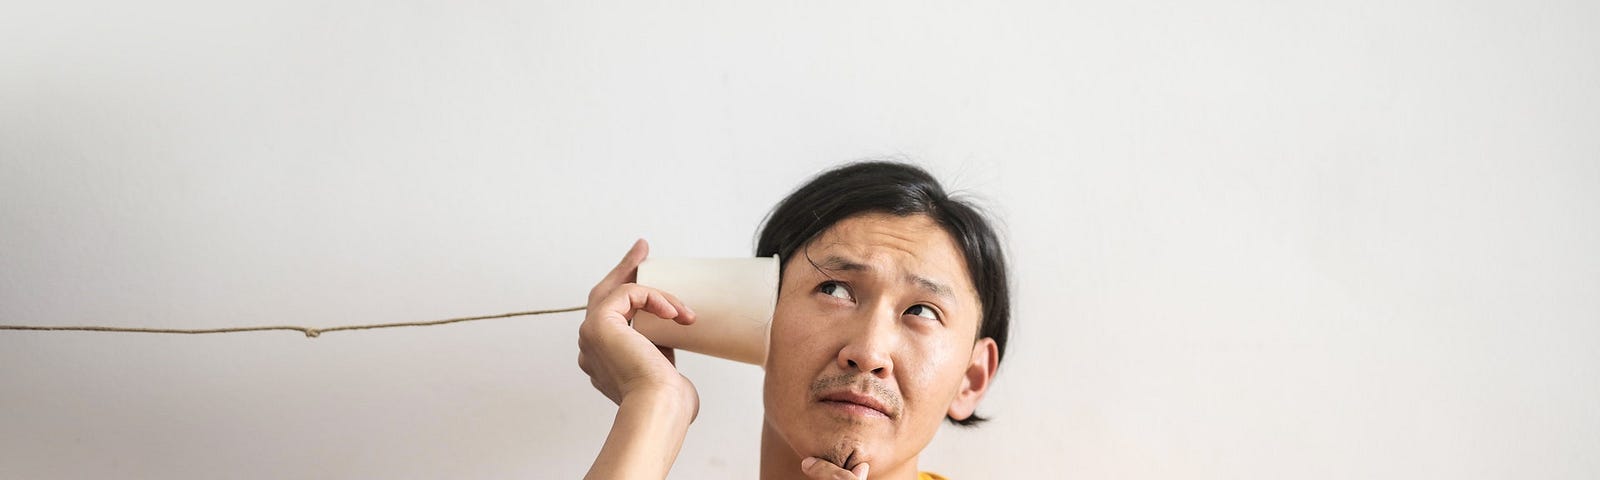 Pensive ethnic man listening to answer in paper cup phone